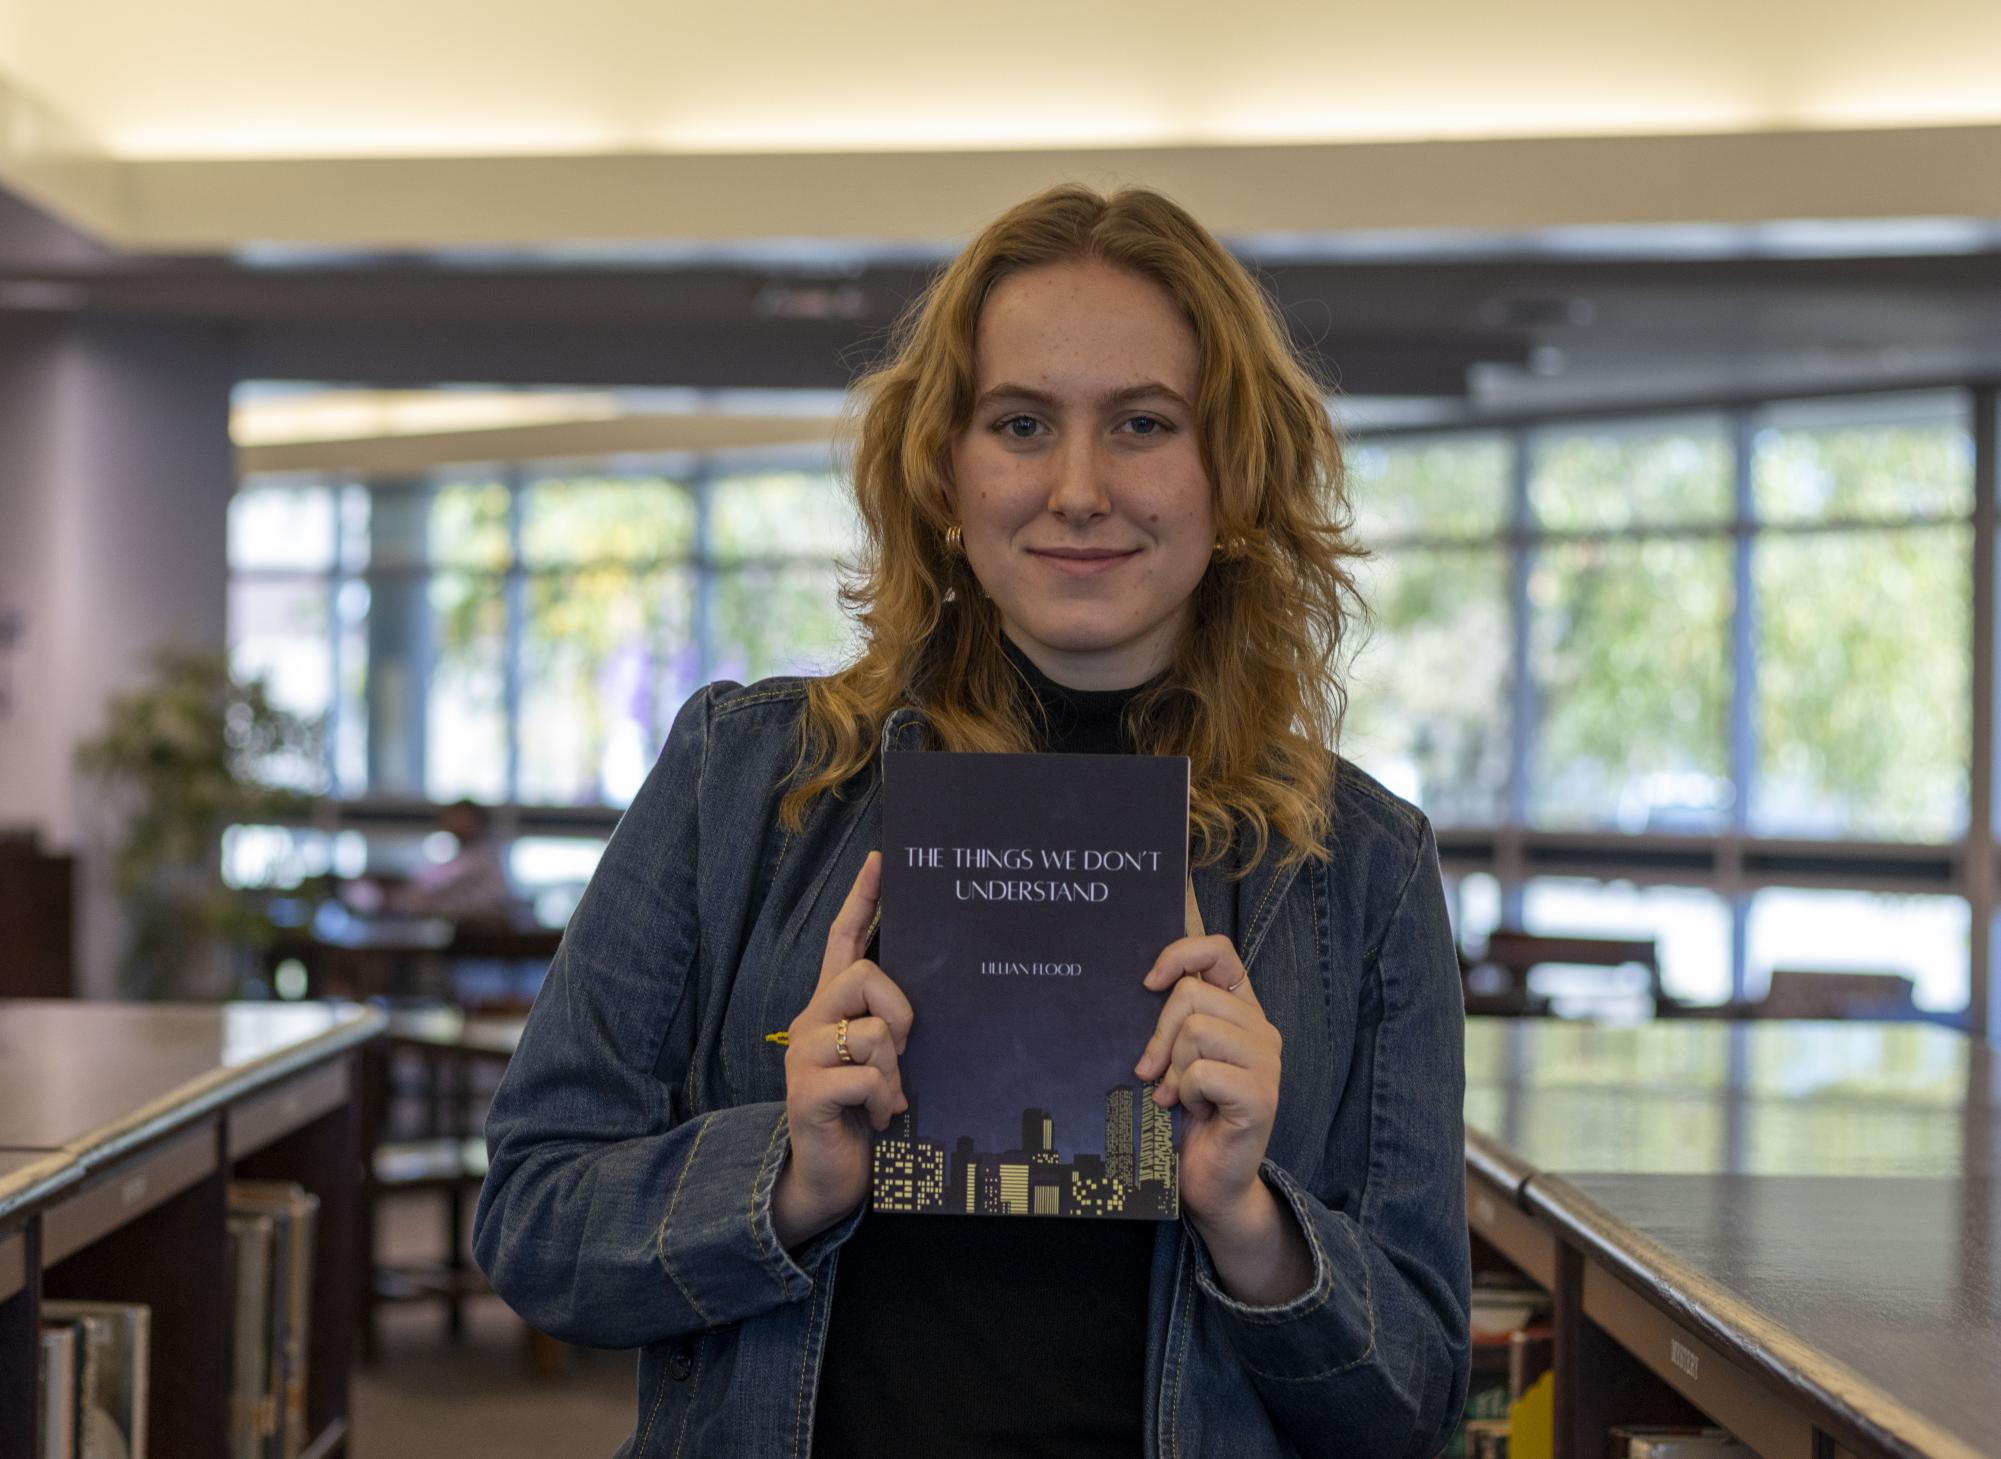 “It was my therapy method, just unleashing inner emotions and whatever I was feeling at the time and being able to put it in one place,” Senior Lillian Flood said, describing her book writing process.  
